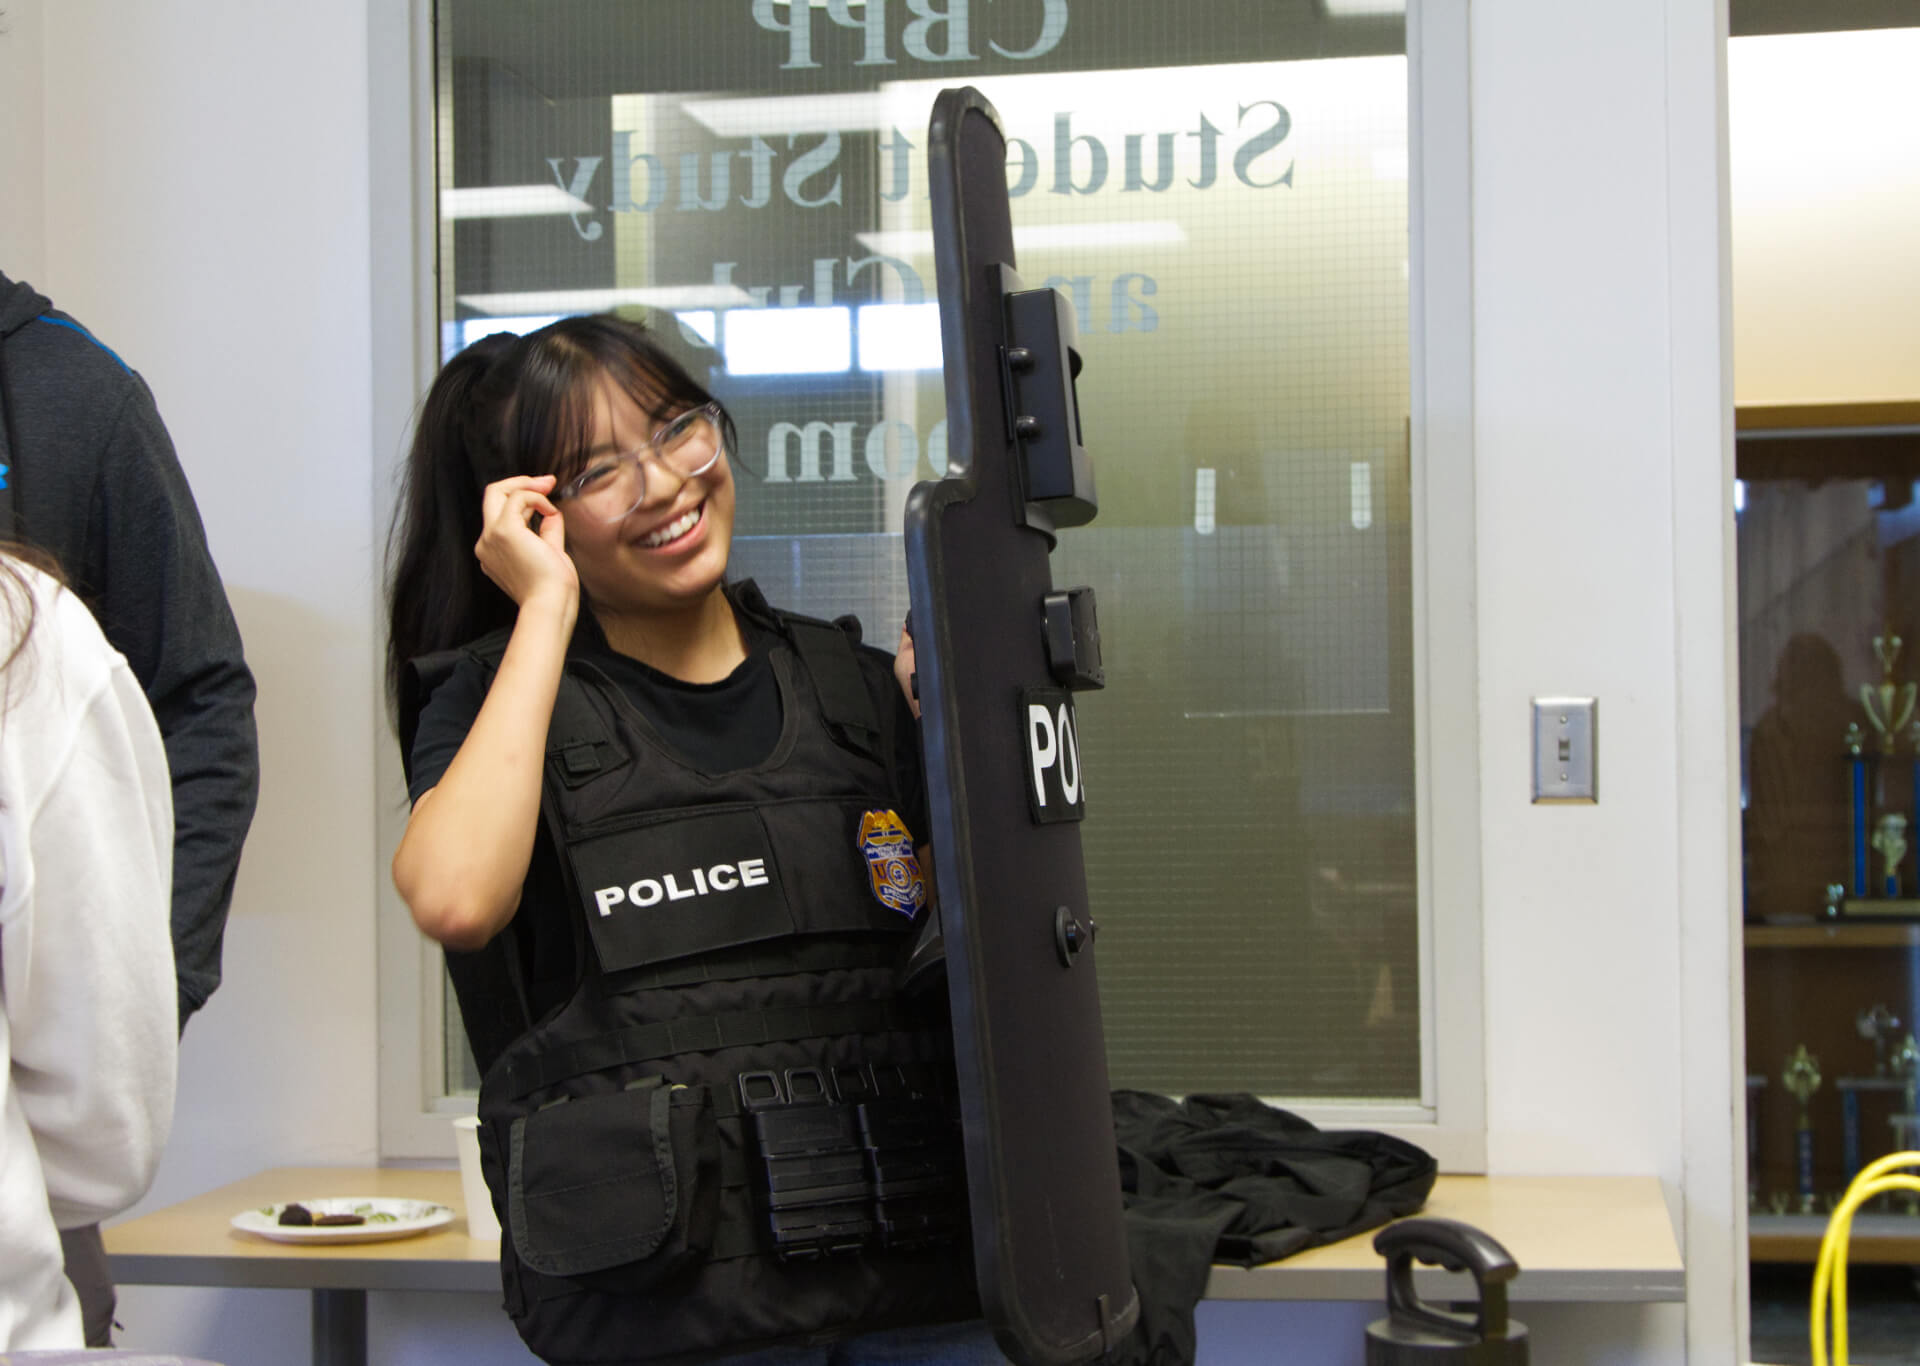 Student tries on IRS agent gear